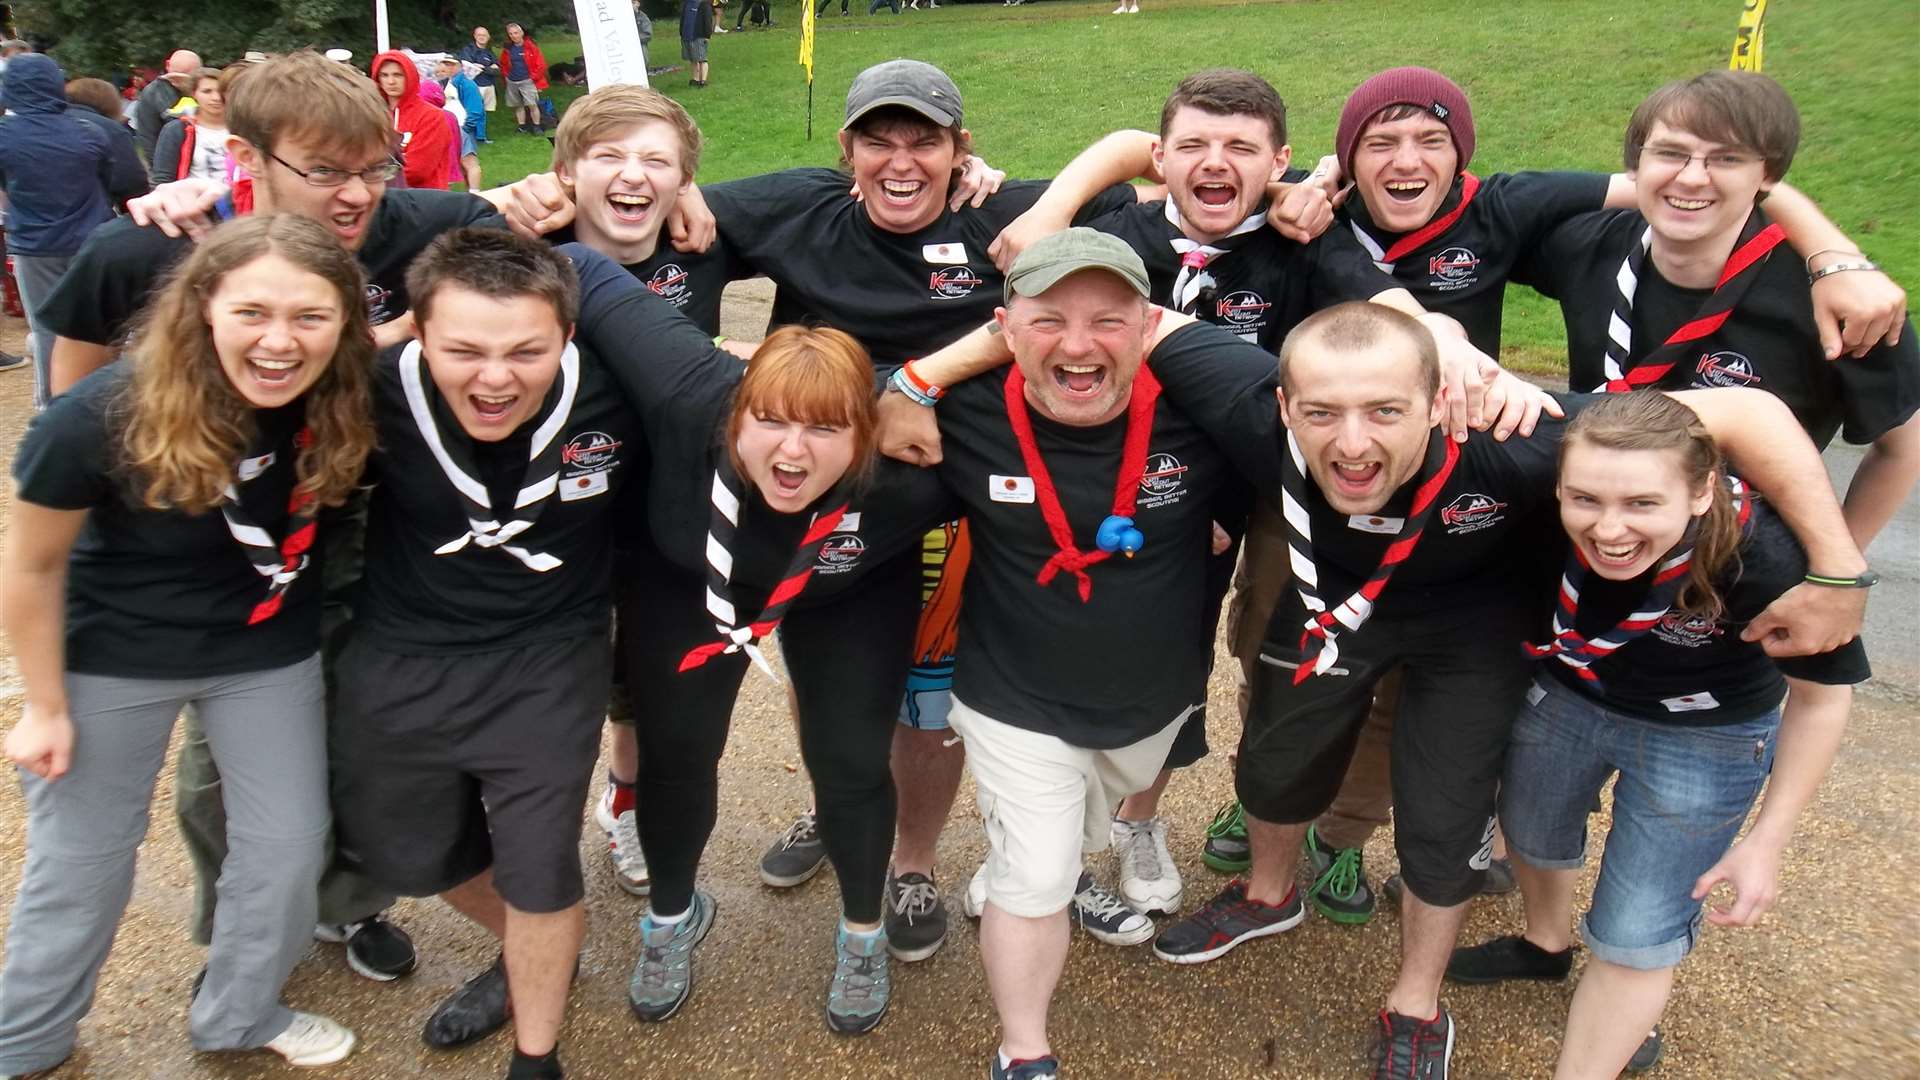 The KM Dragons - a team from Kent Scouts - took part in the KM Dragon Boat Race. The event attracted 38 teams and raised £75k for Kent charities